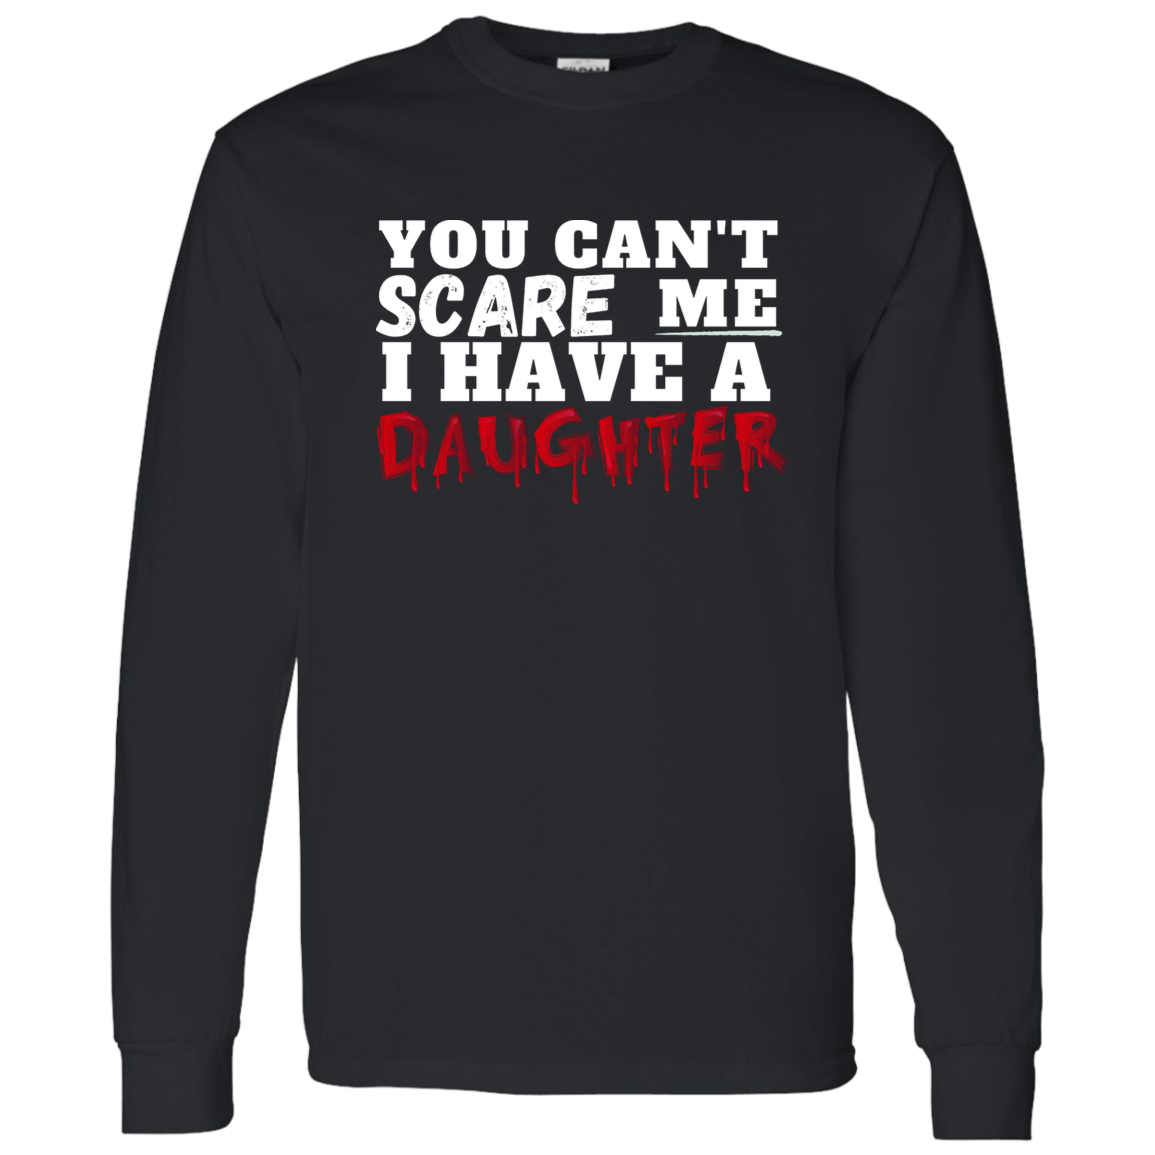 Can't Scare Me | Daughter (LS Shirt)